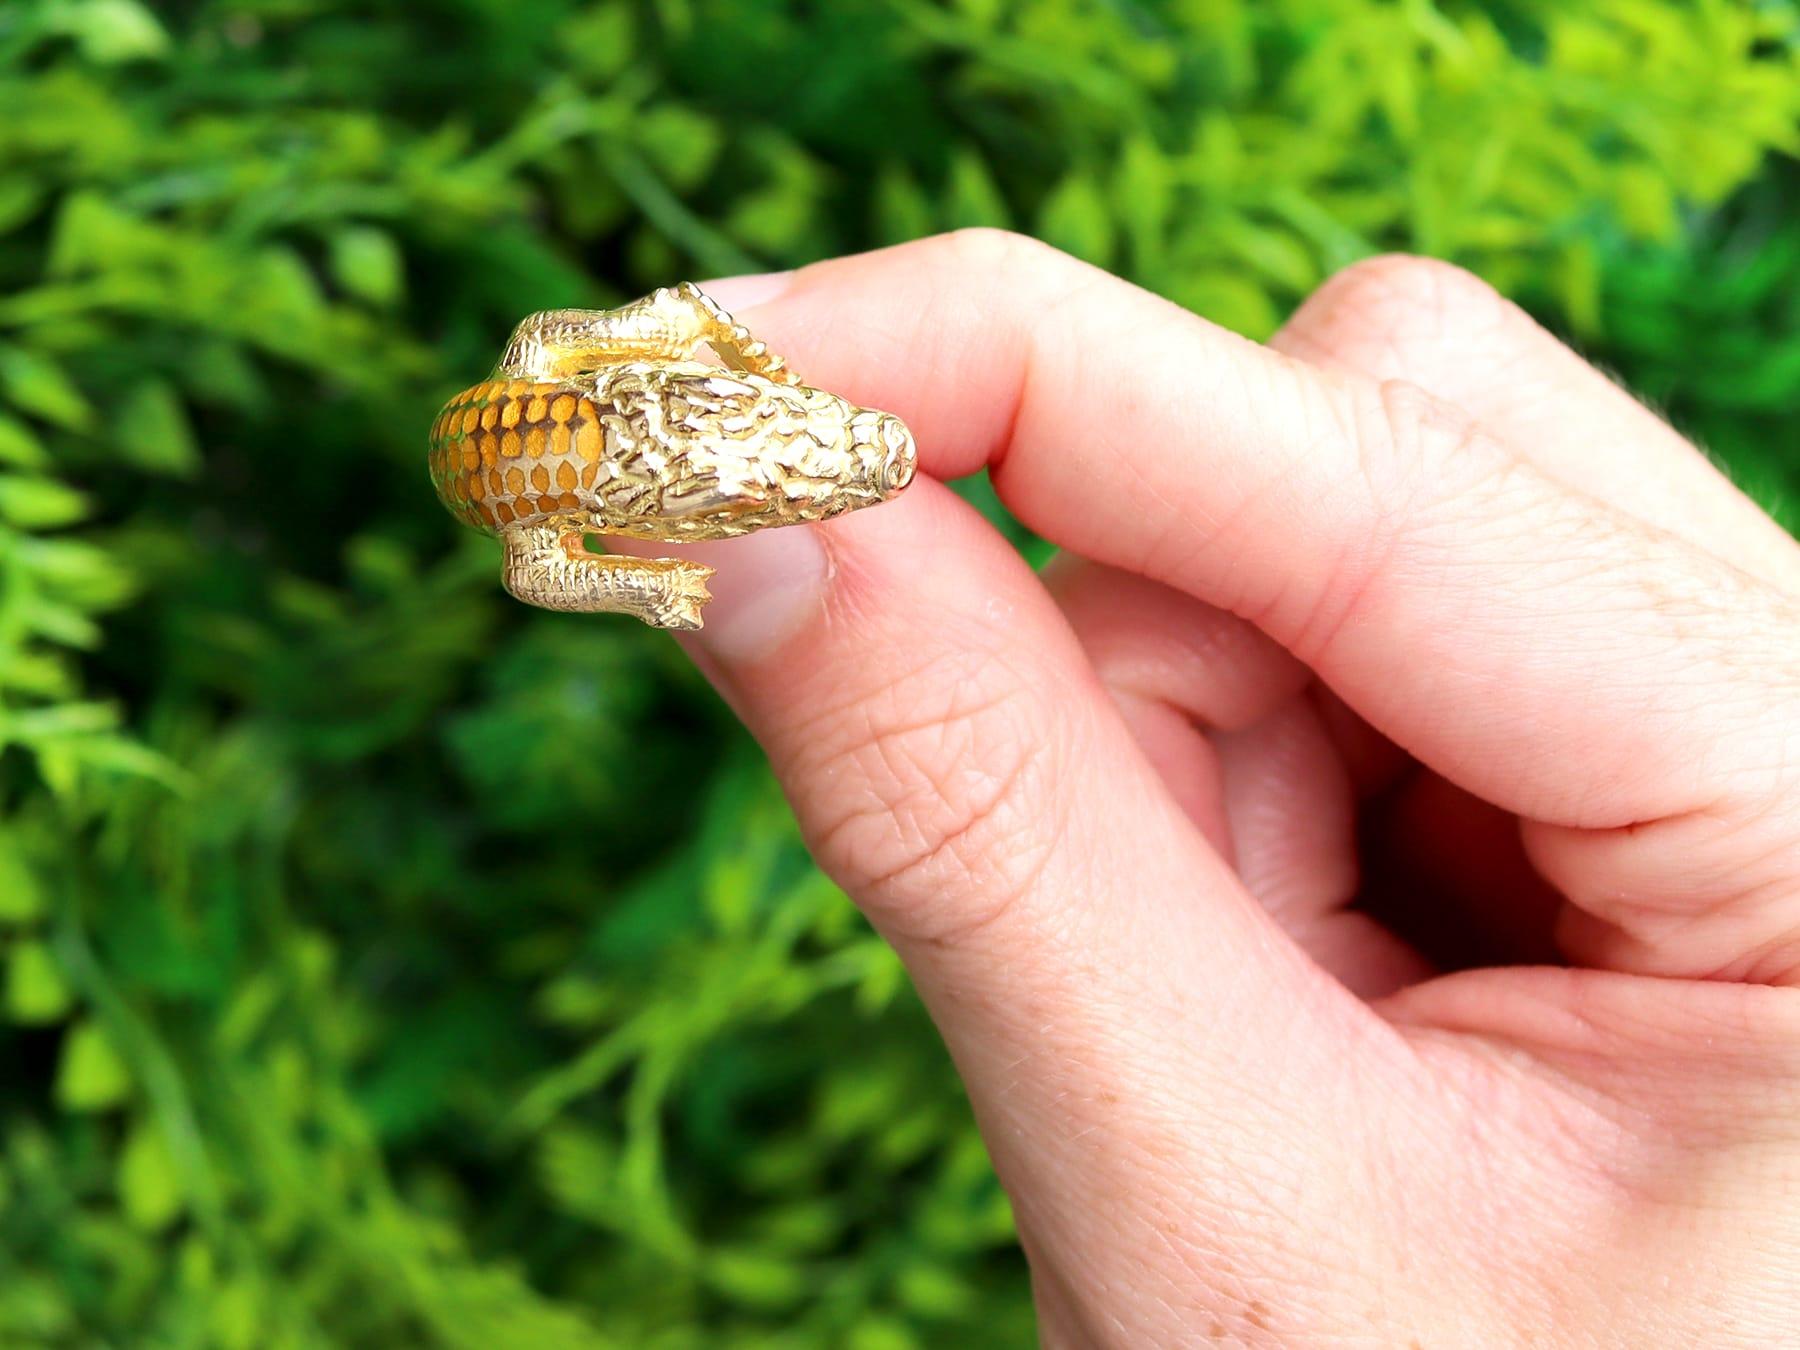 A fine and impressive vintage 18 karat yellow gold and plique-à-jour crocodile ring; part of our diverse vintage jewellery collections.

This fine and impressive vintage ring has been crafted in 18k yellow gold.

The ring has been modelled in the